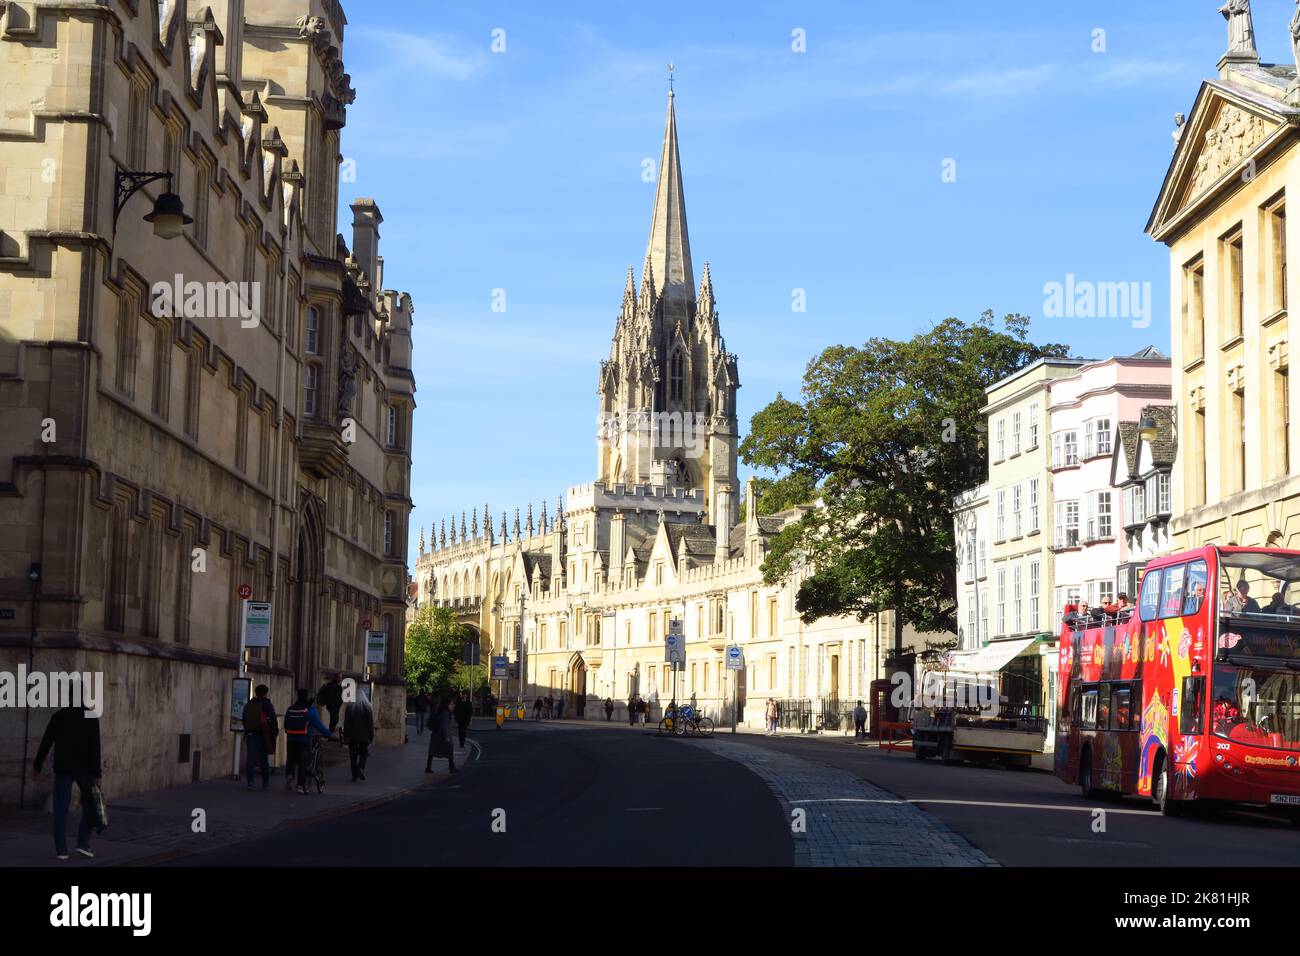 A view of the High Street, Oxford with the University Church of St Mary in the distance Stock Photo